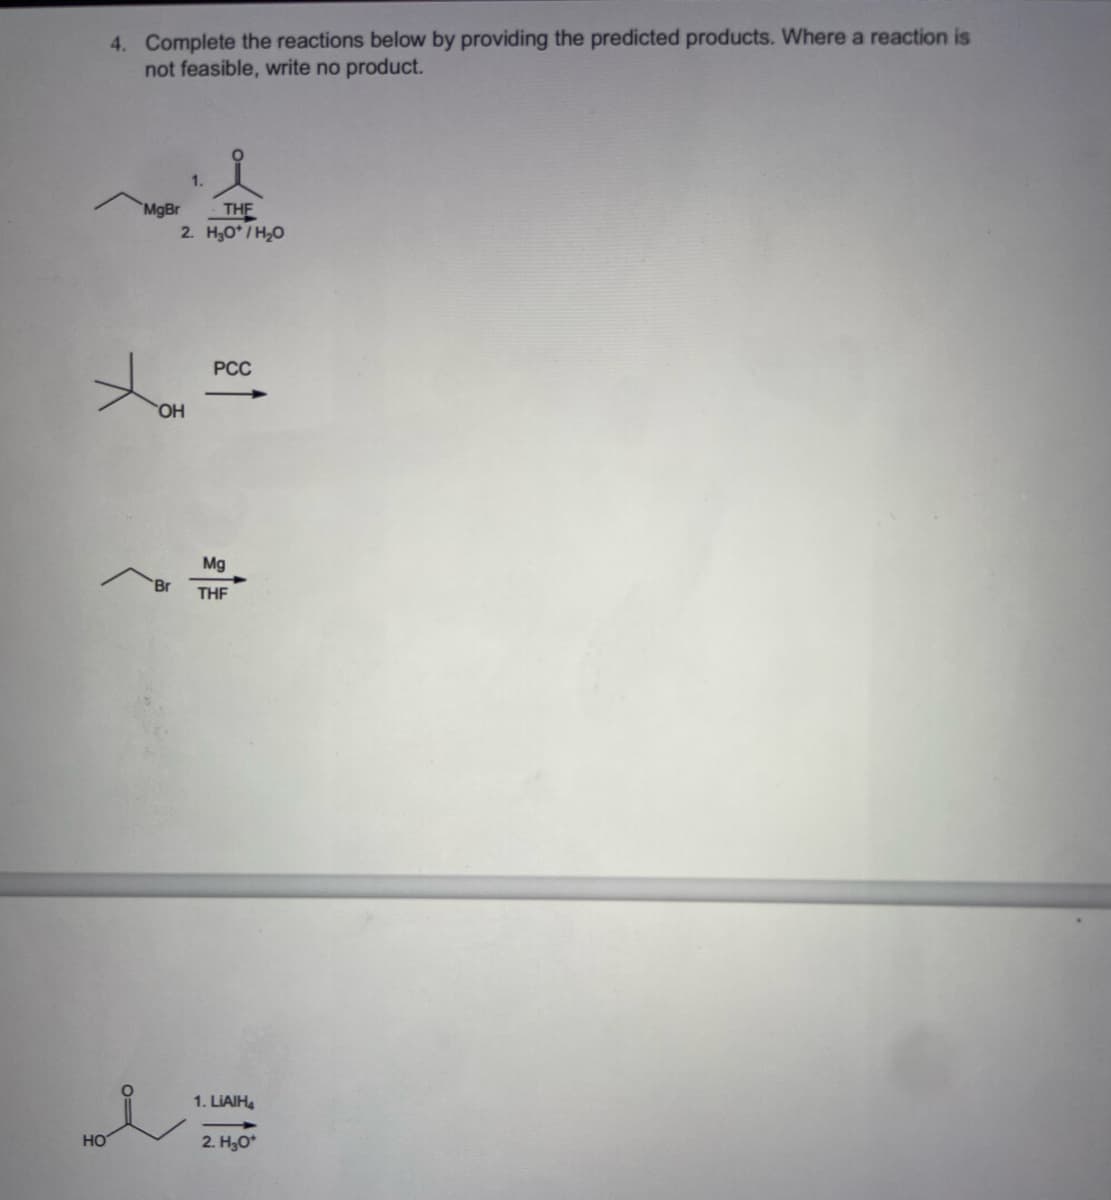 HO
4. Complete the reactions below by providing the predicted products. Where a reaction is
not feasible, write no product.
1.
THE
2. H₂O*/H₂O
PCC
MgBr
OH
"Br
Mg
THF
1. LIAIH4
2. H₂O*